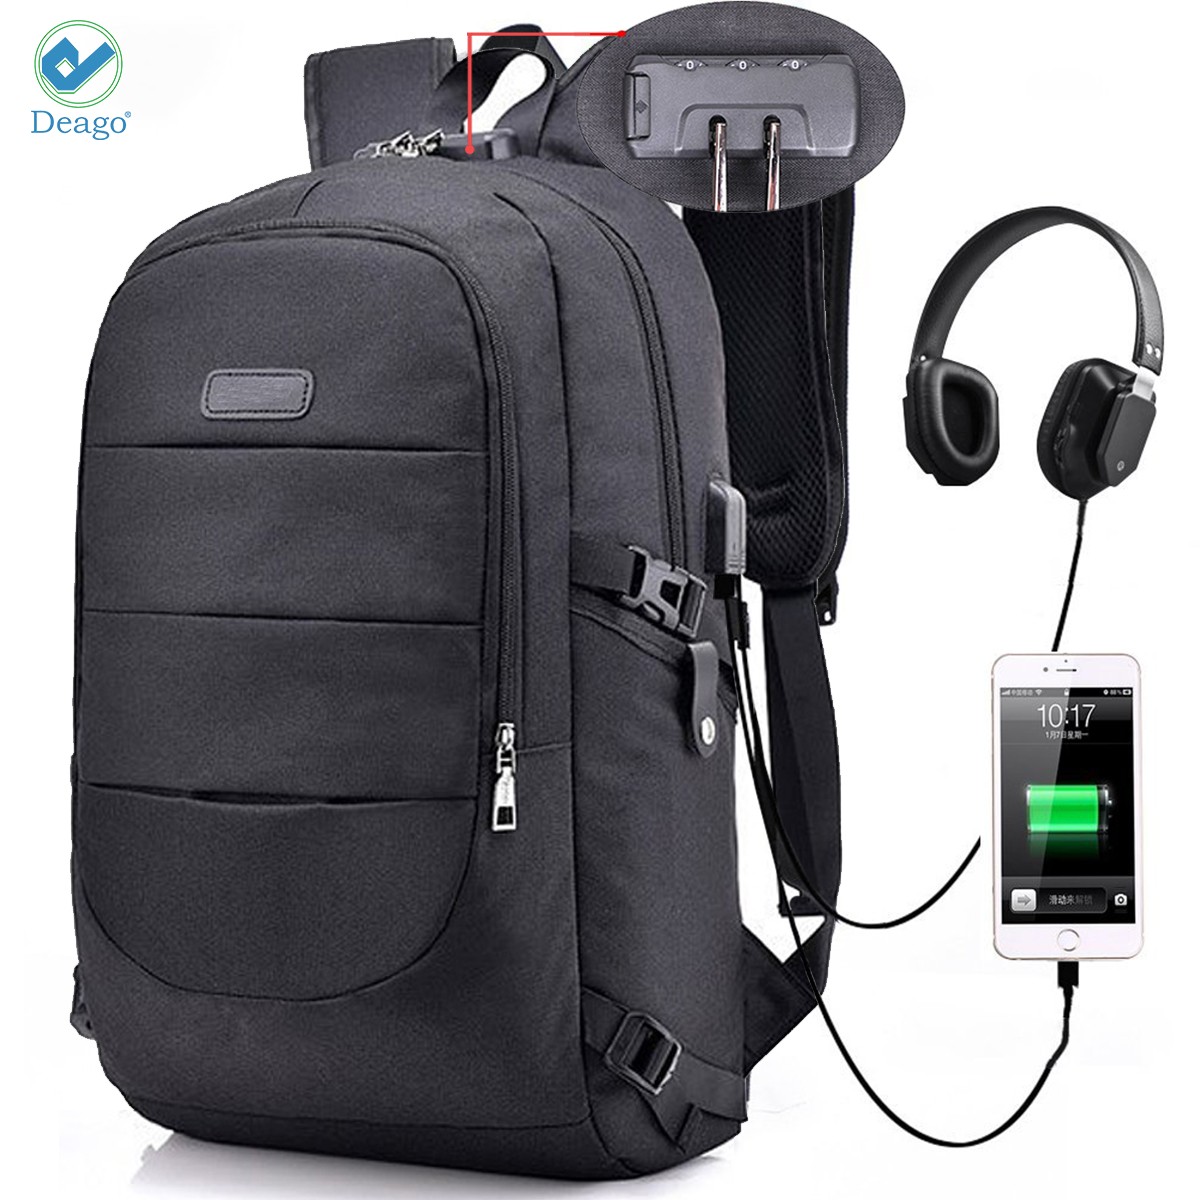 Deago Laptop Backpack, Business Anti Theft with lock Waterproof Travel Backpack with USB Charging Port for Laptops up to 17 inches (Black) - image 1 of 9